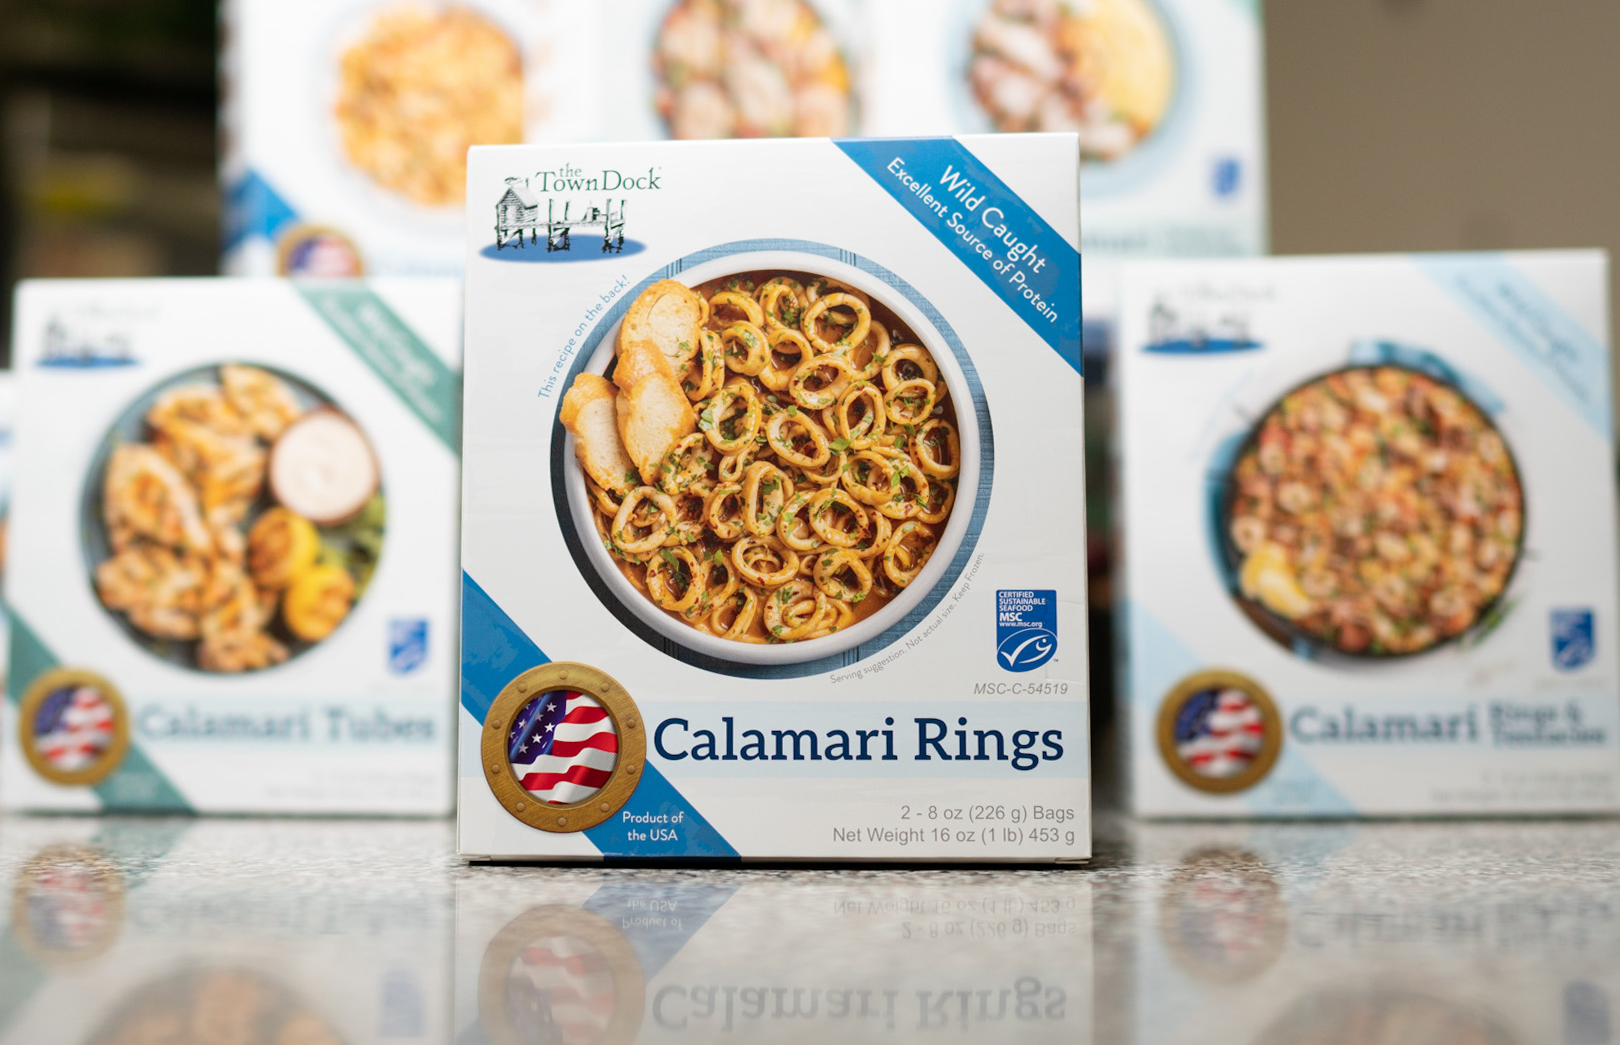 The Town Dock calamari for grocer stores, wholesale squid, one pound boxes